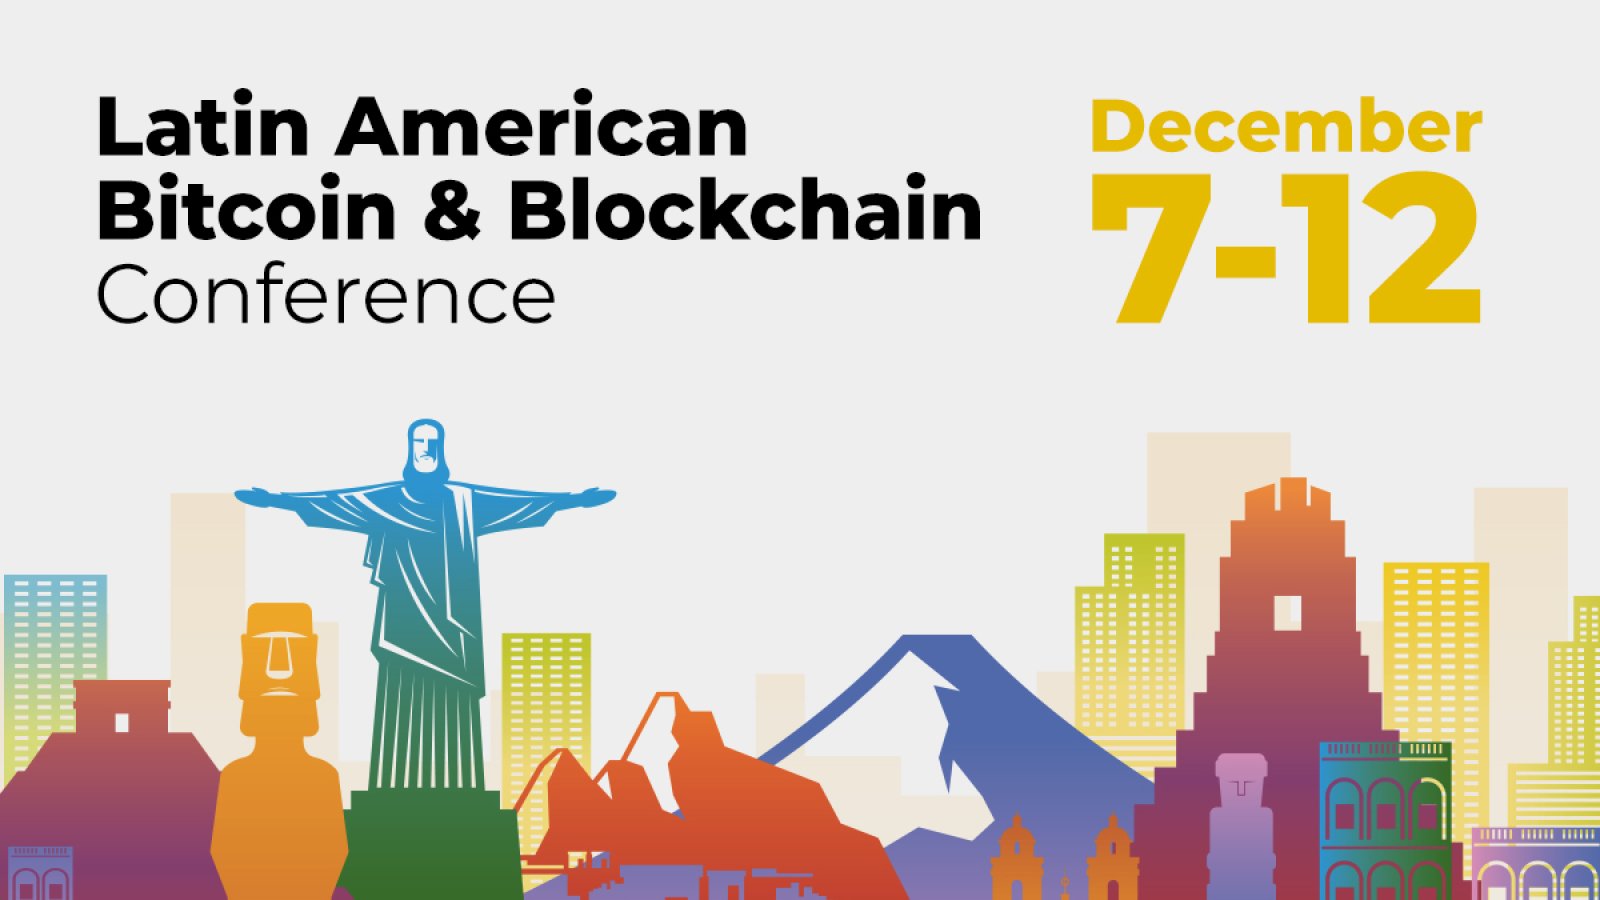 Latin American Bitcoin & Blockchain Conference Gathers Industry Leaders for One-of-a-Kind Digital Experience December 7-12